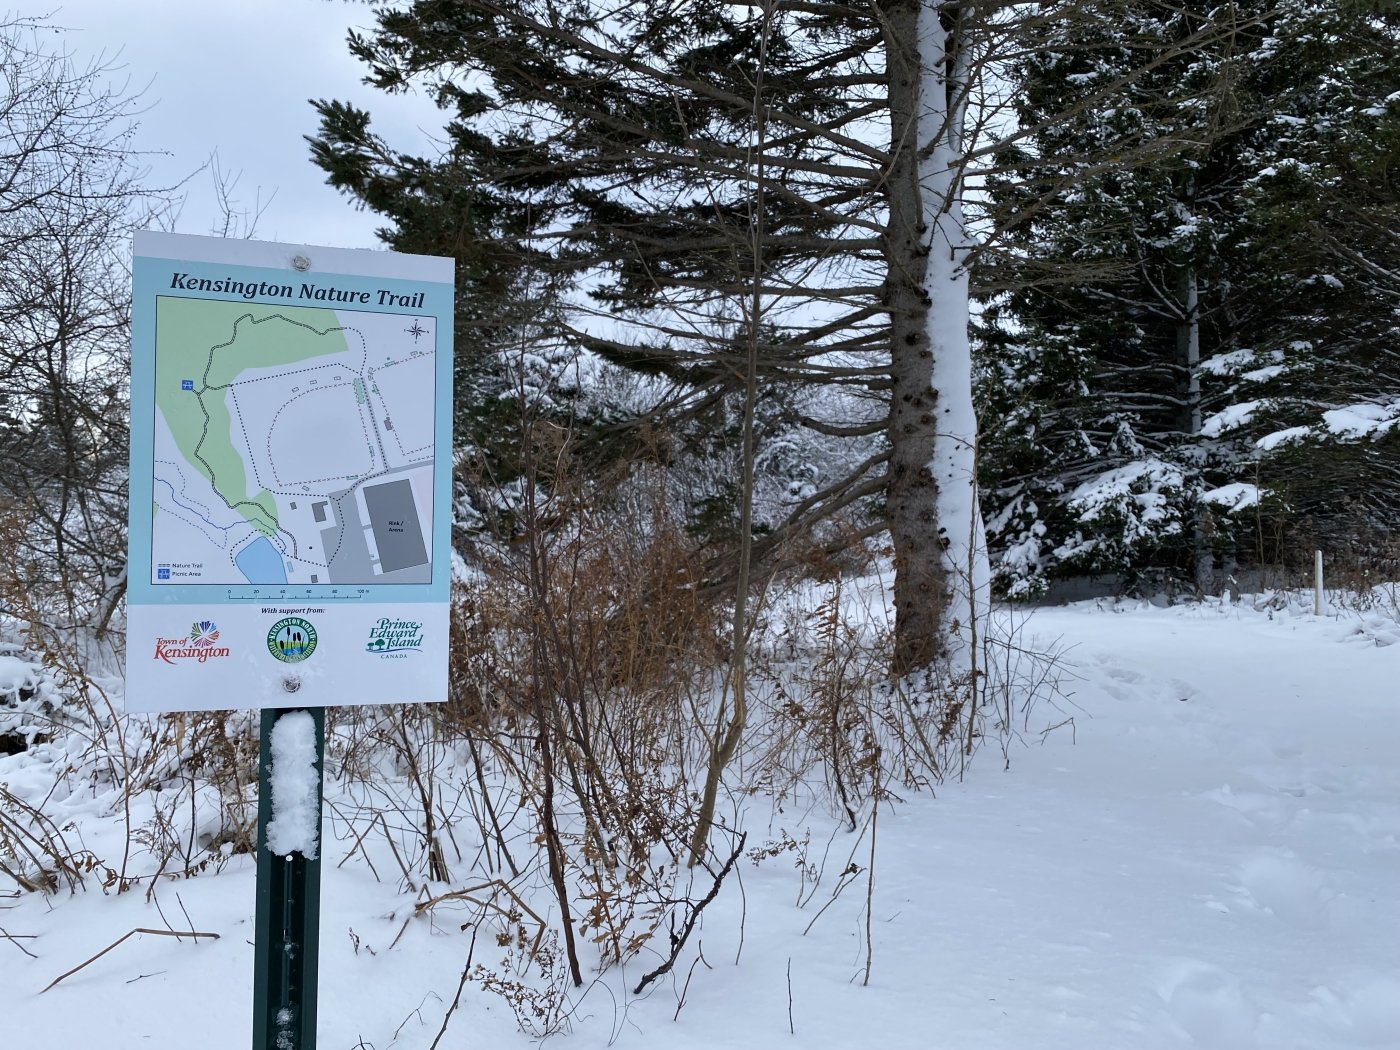 Sign at entrance to Kensington Nature Trail in winter